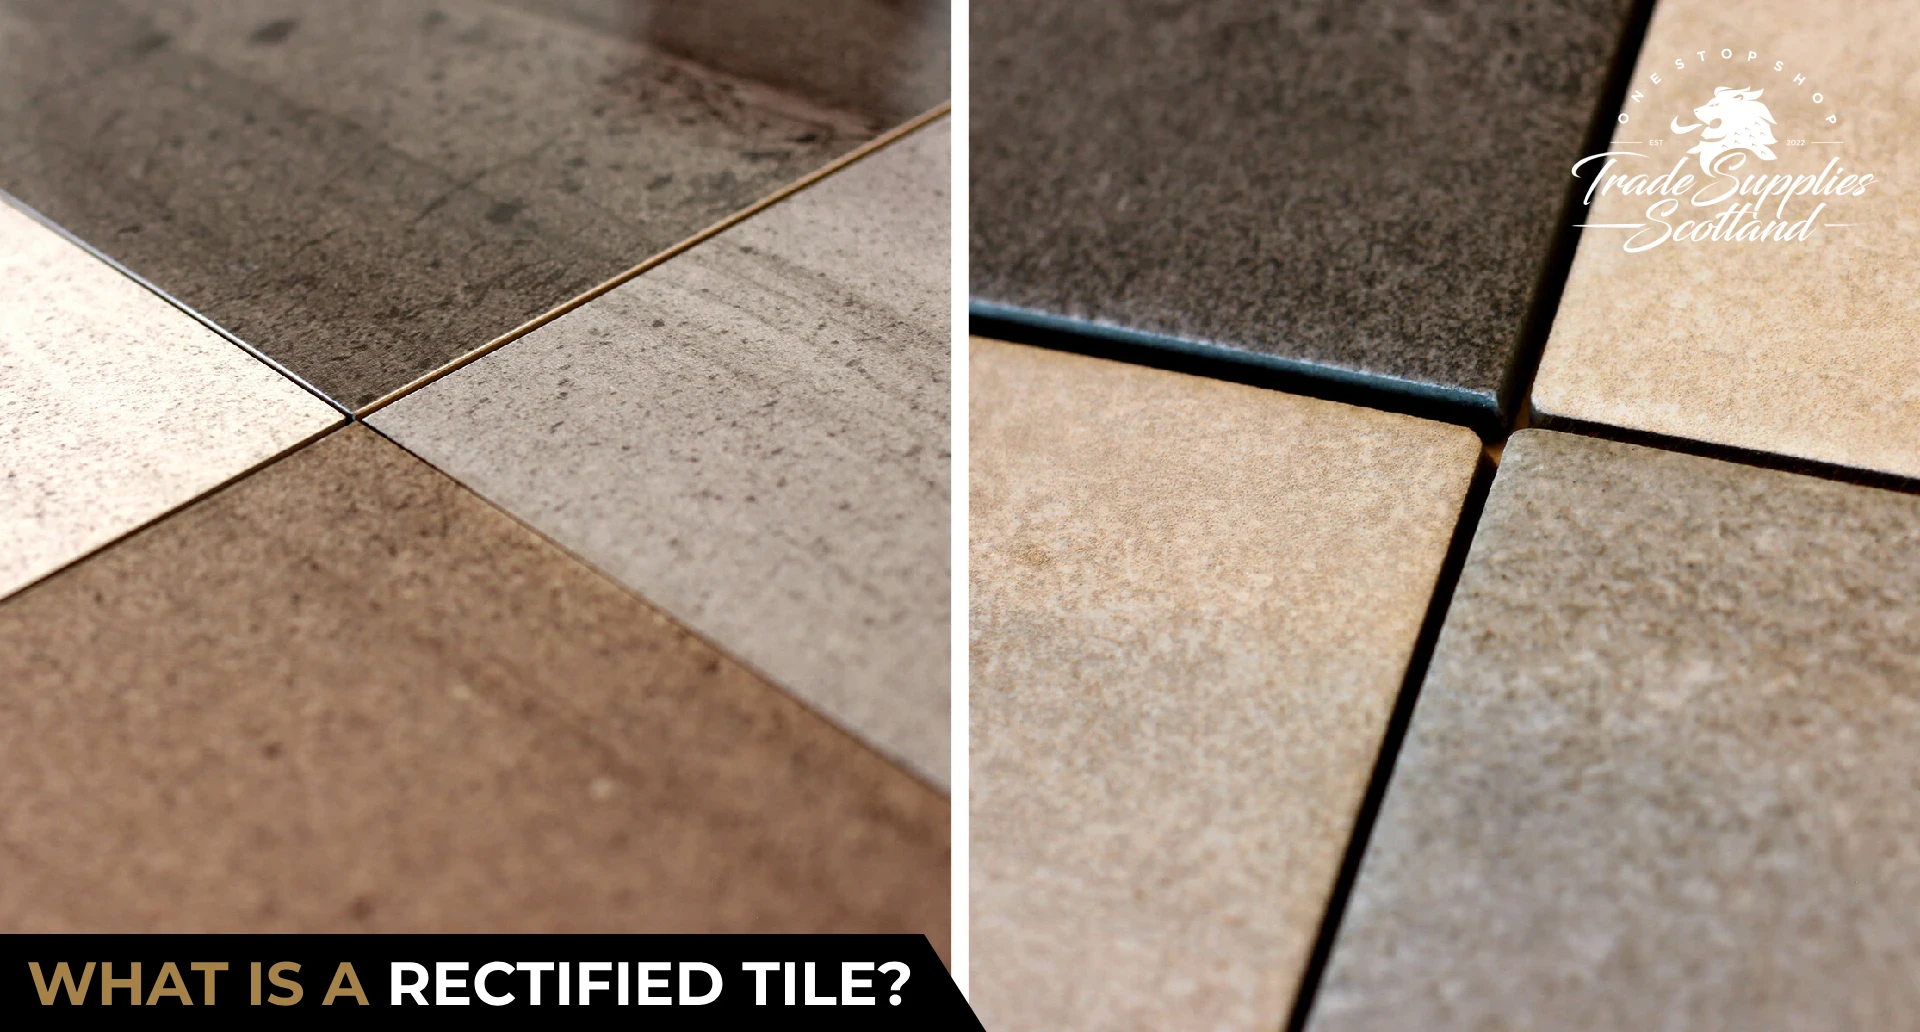 What is a rectified tile?